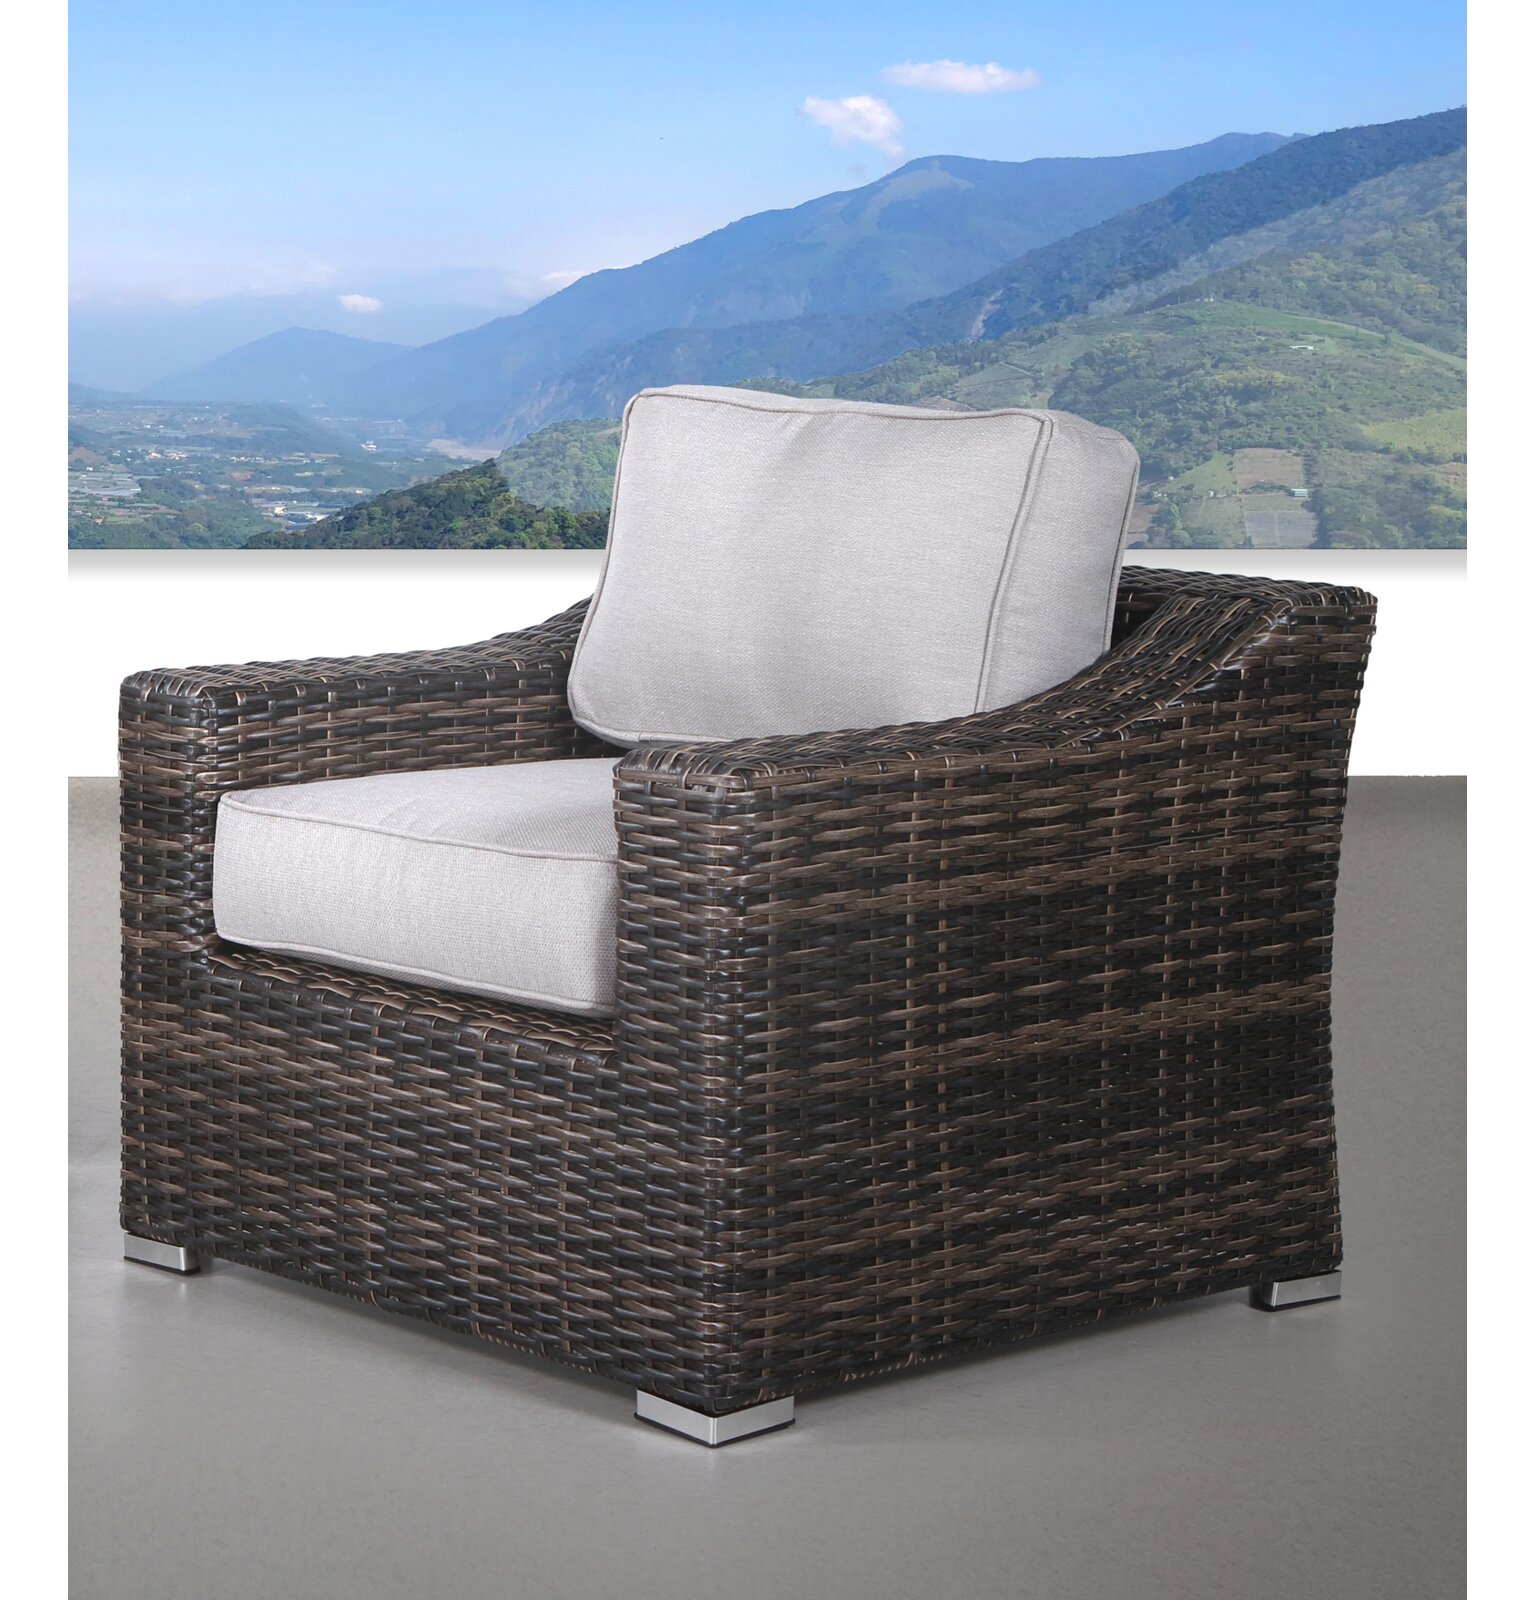 Wynona Club Patio Chair with Cushions, : 31 lb., Outer Frame Material: Wicker/Rattan - image 1 of 4